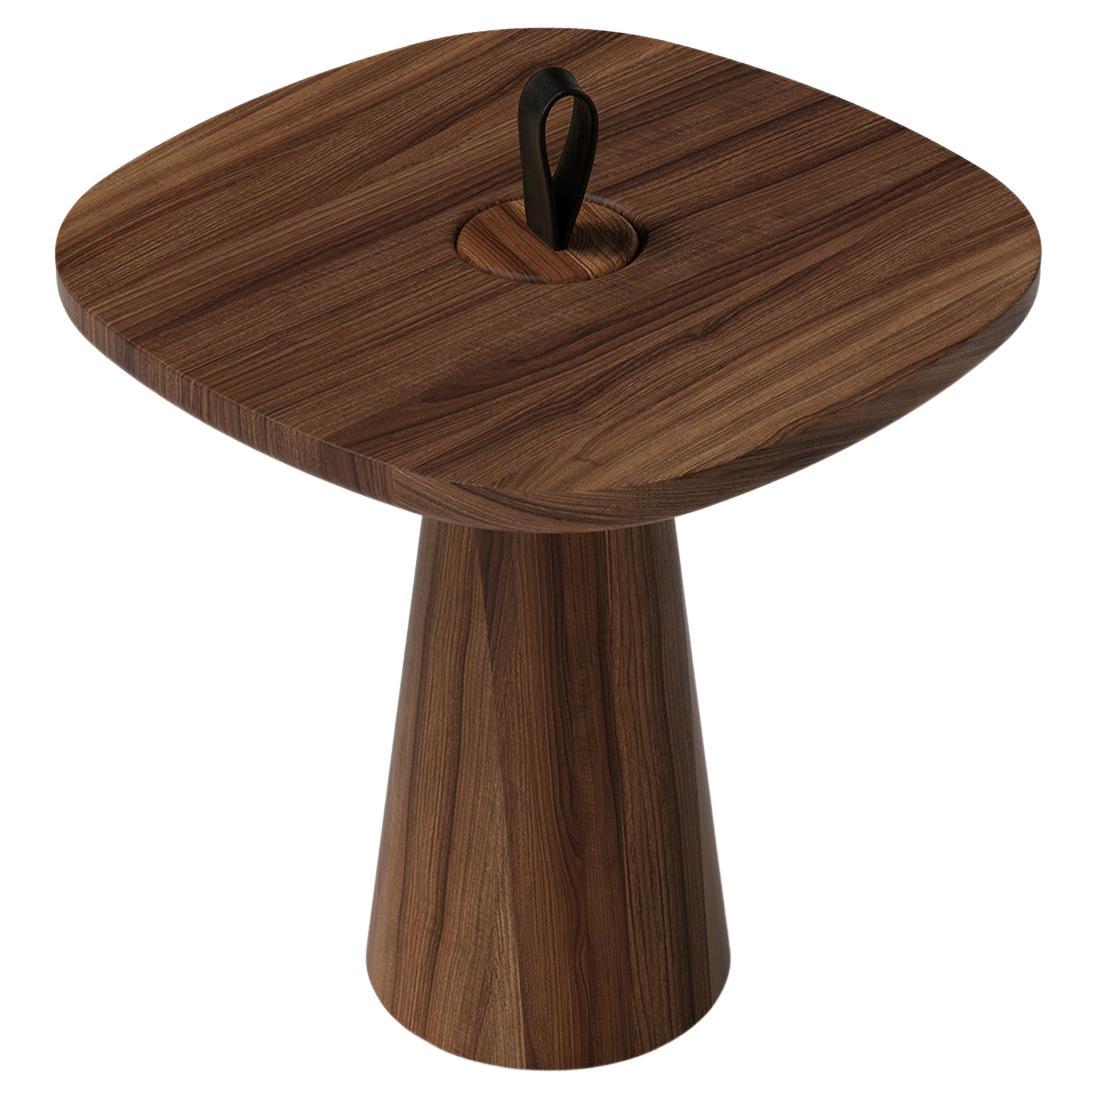 Minimalist Modern Side Table in Walnut and Black Leather Strap For Sale